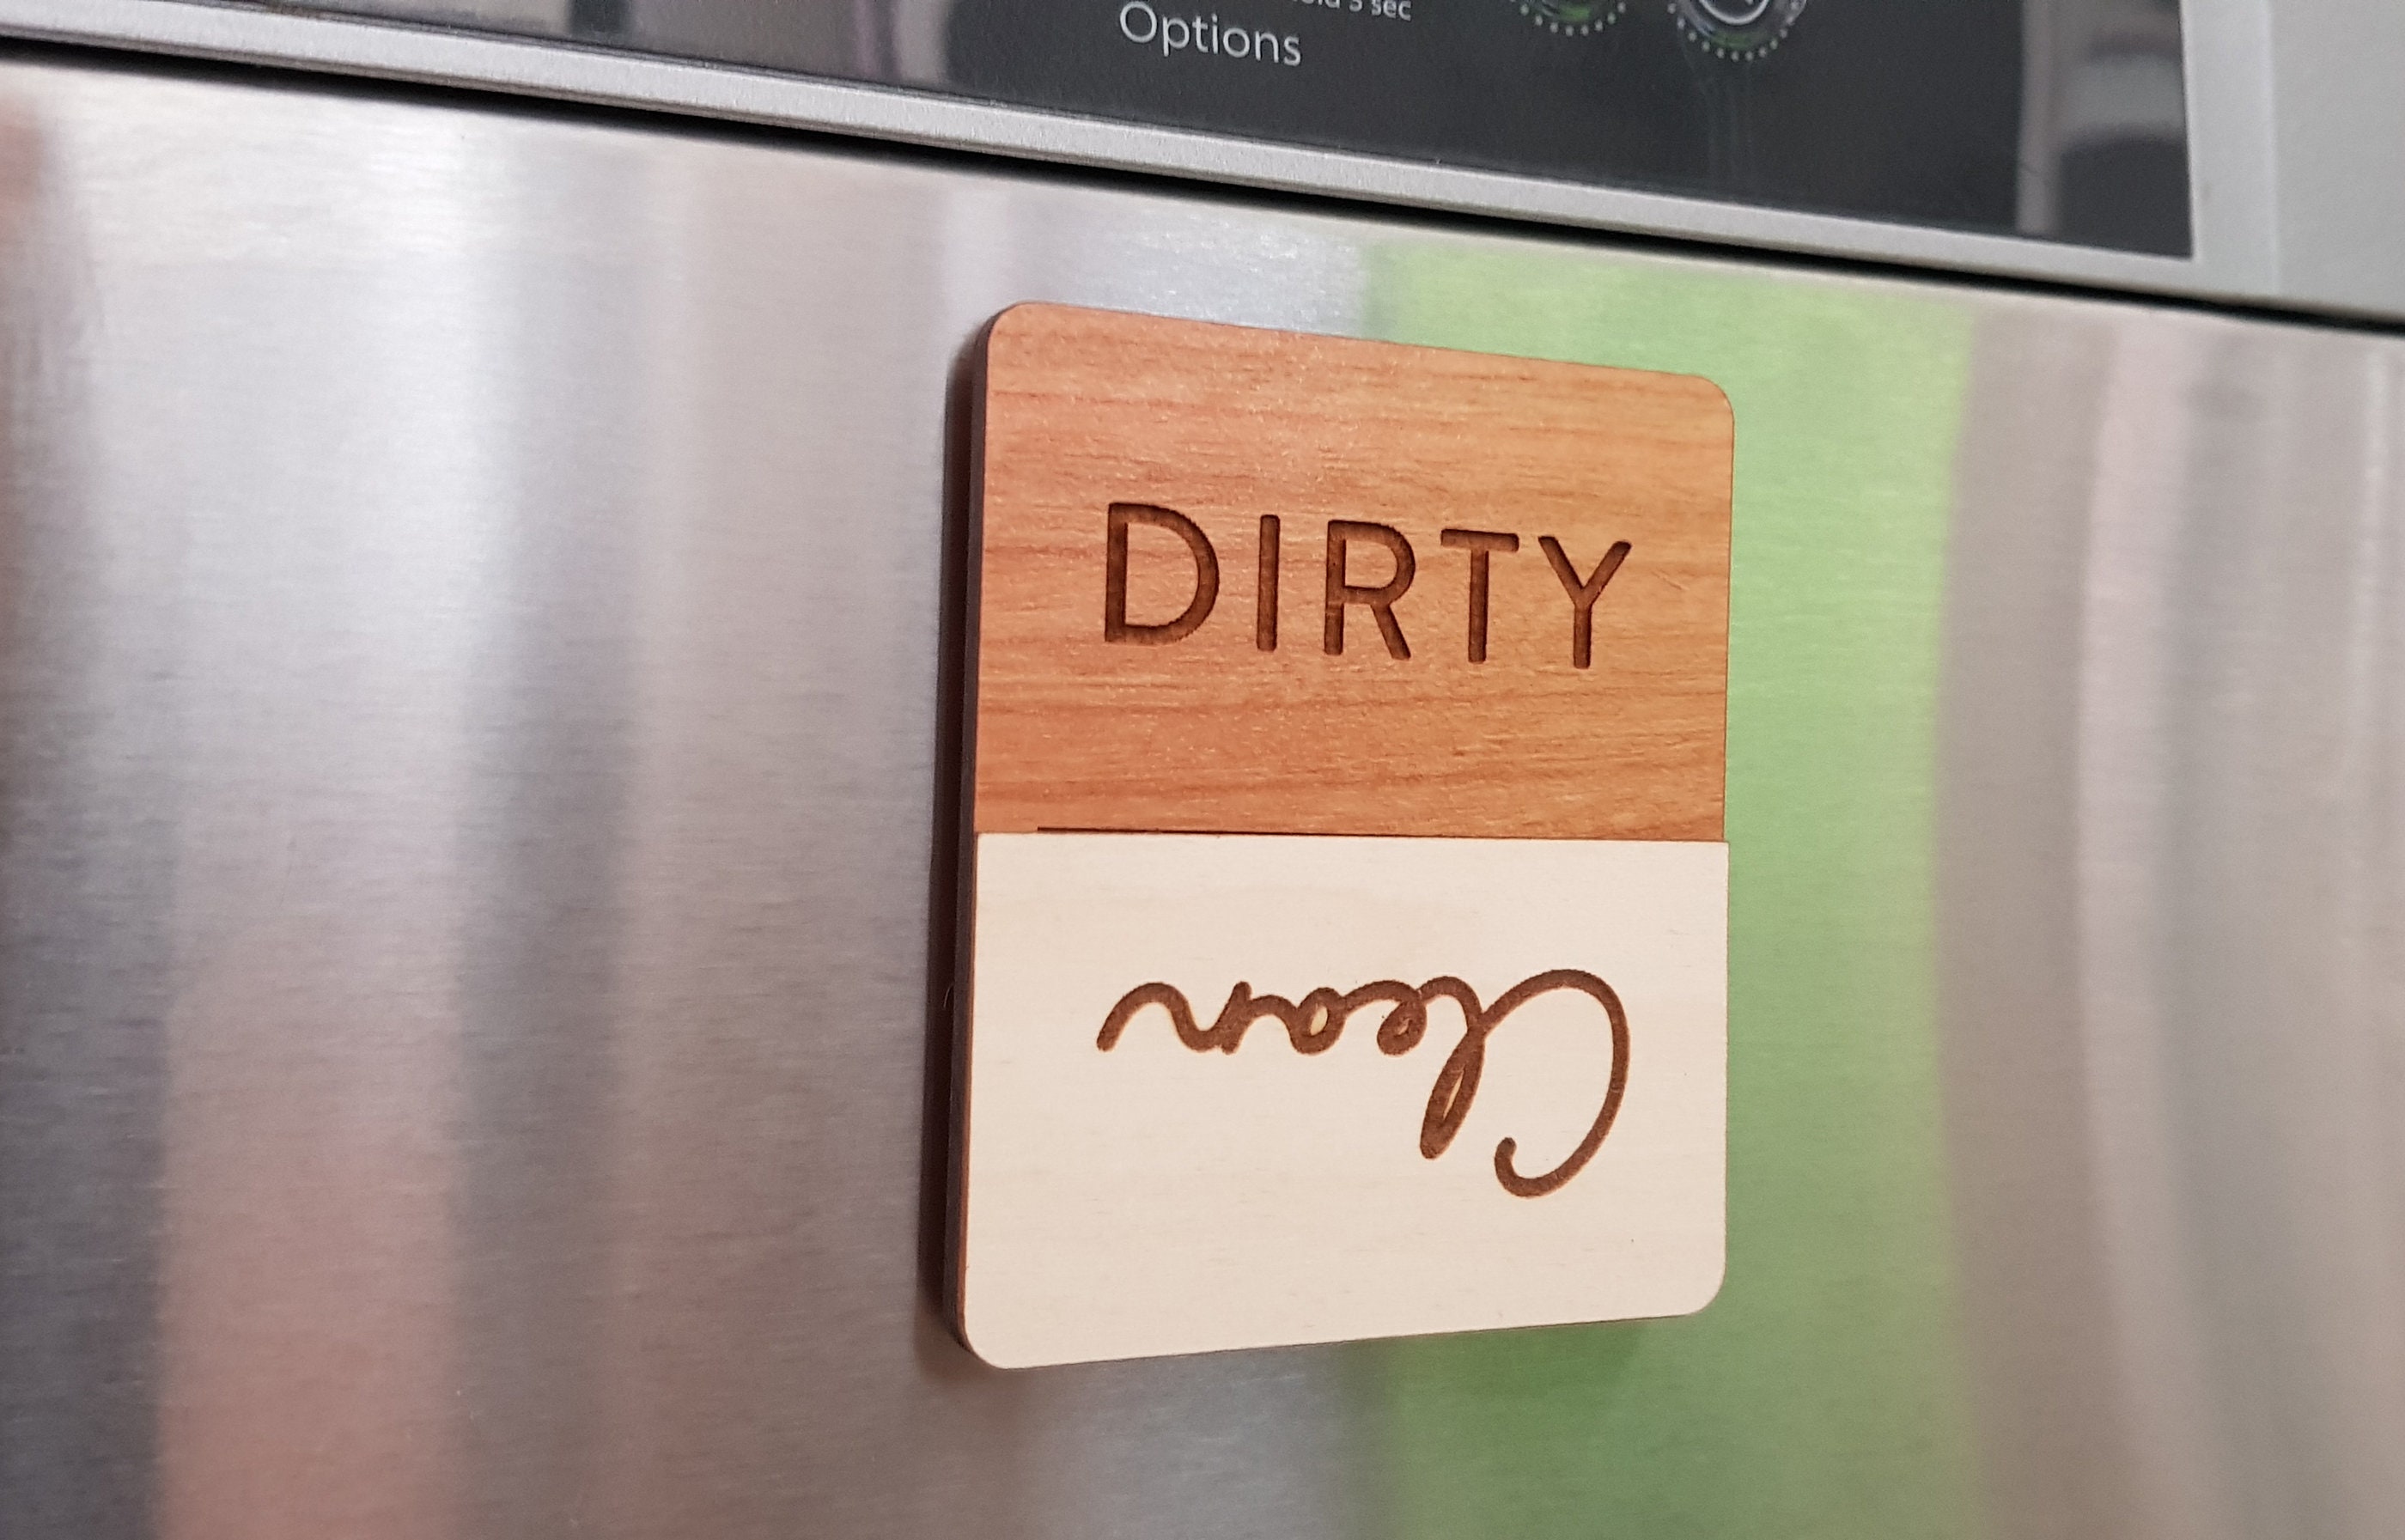 10 Best Dishwasher Clean Dirty Magnet for 2023